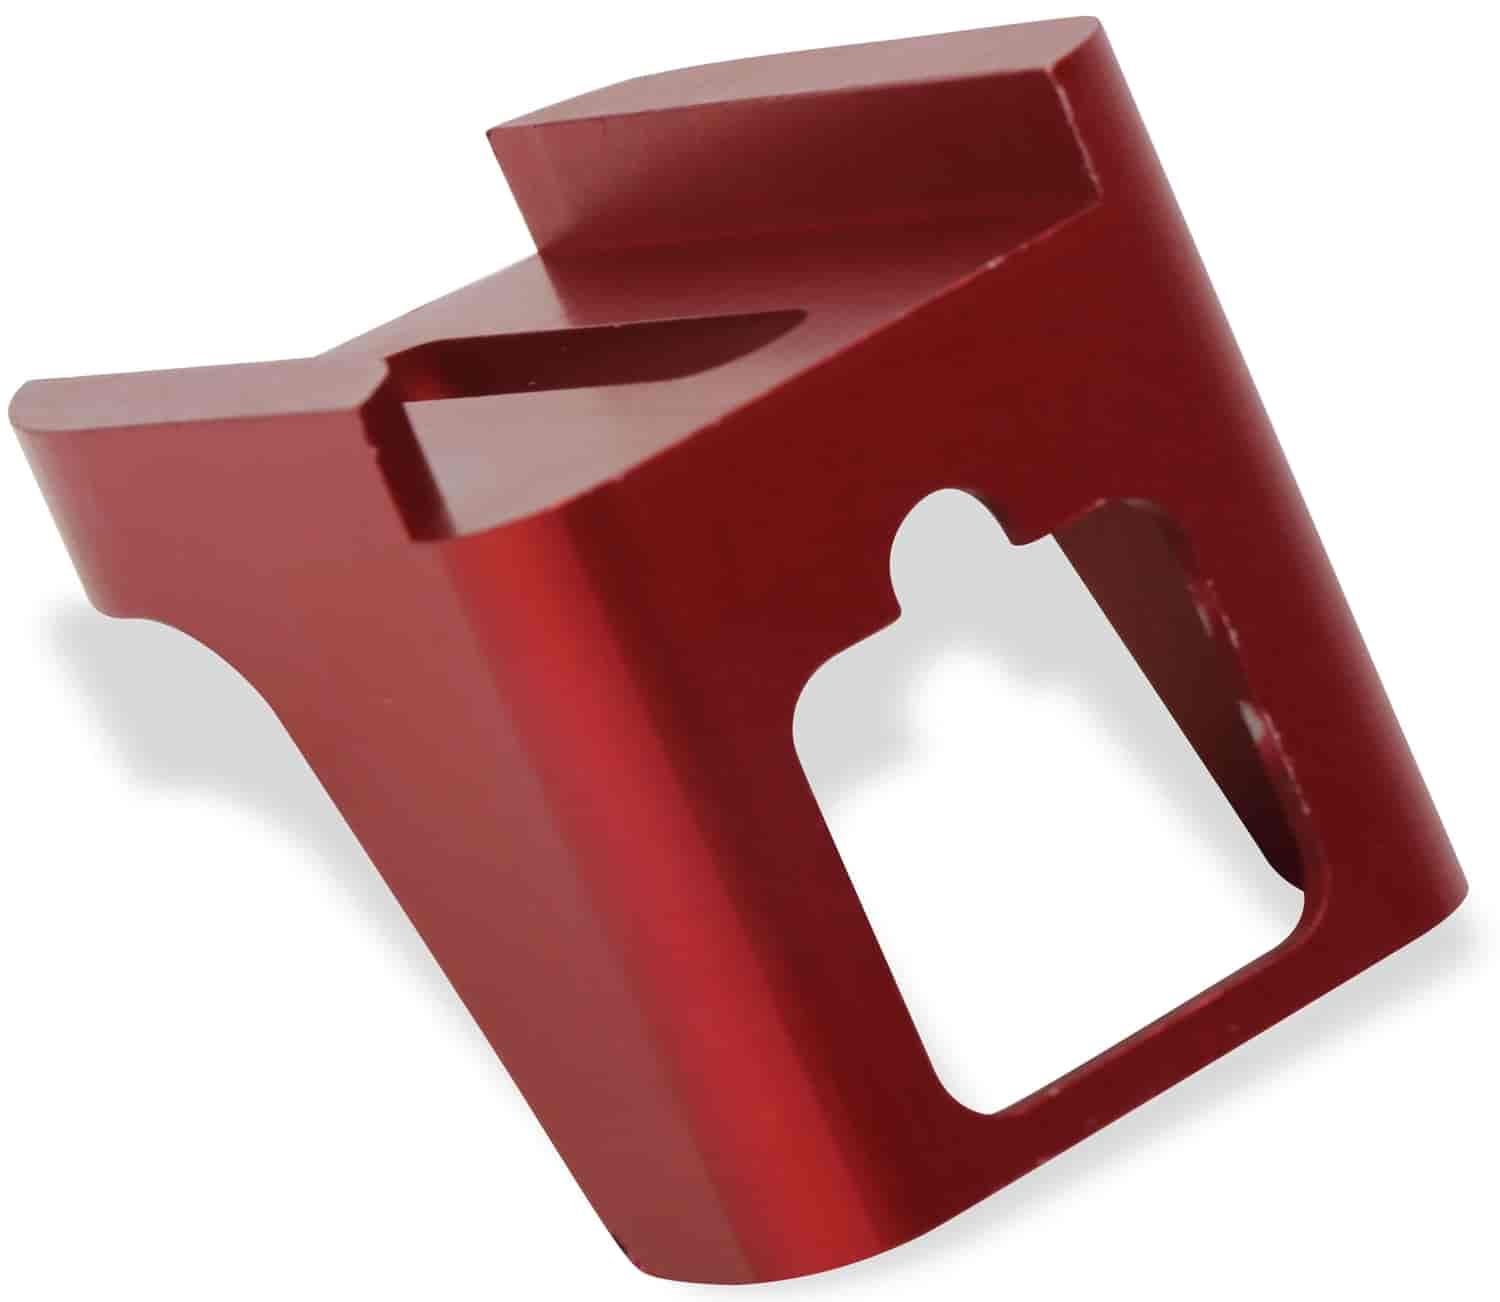 Kickdown Detent Cable Mount Bracket Fits GM-Style Cable, Use With Throttle Cable Bracket - Red Finish